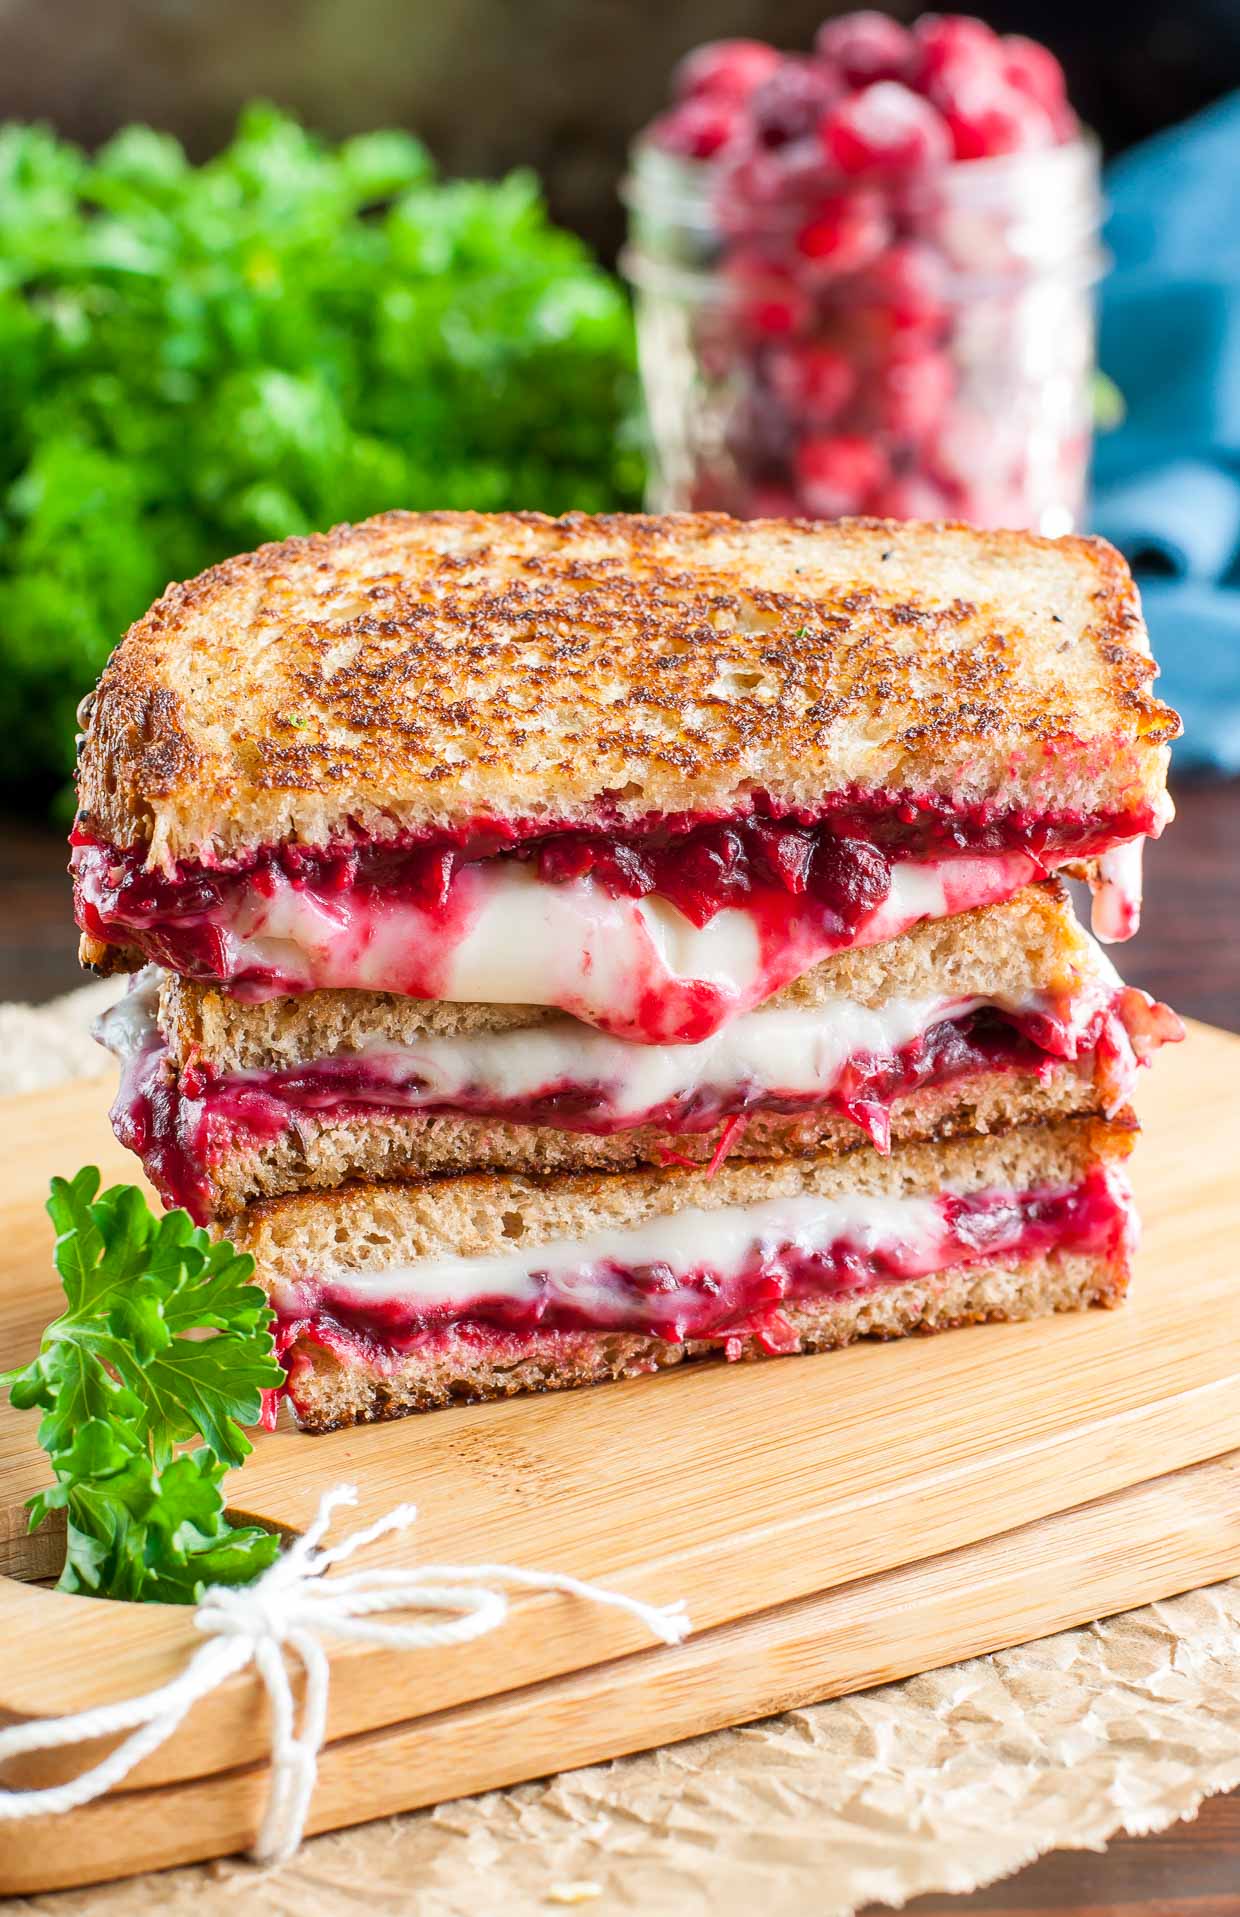 6 Over-the-Top Grilled Cheese Recipes You Have to Try